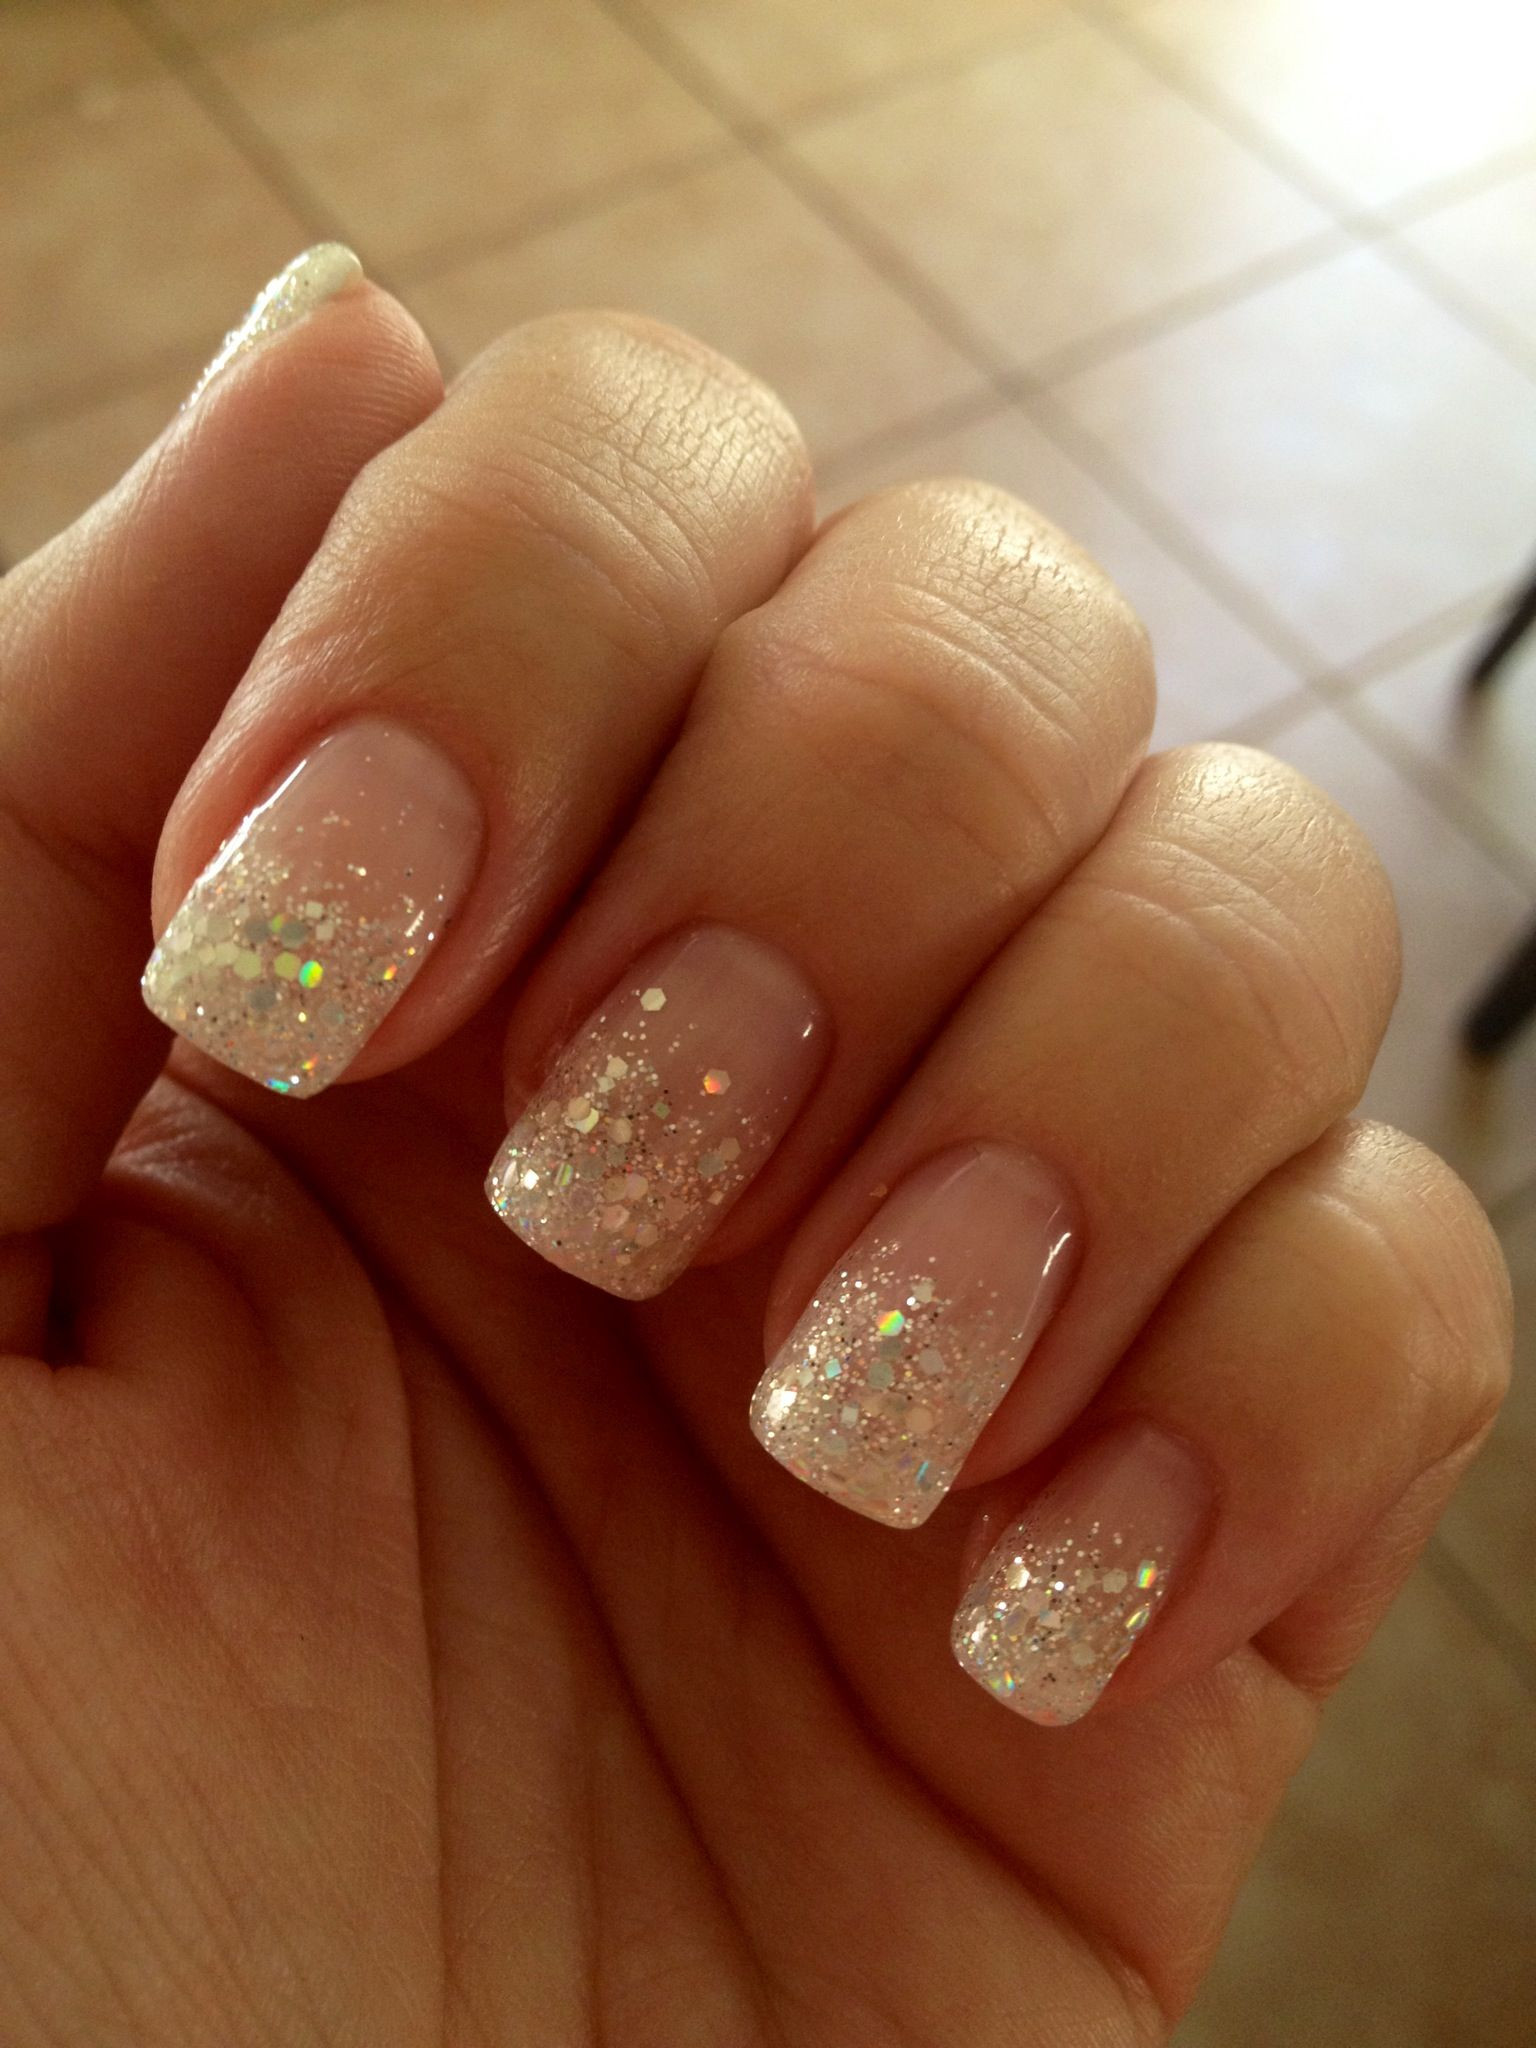 Glitter Tip Acrylic Nails
 Glitter French Manicure Fade Can you say wedding nails